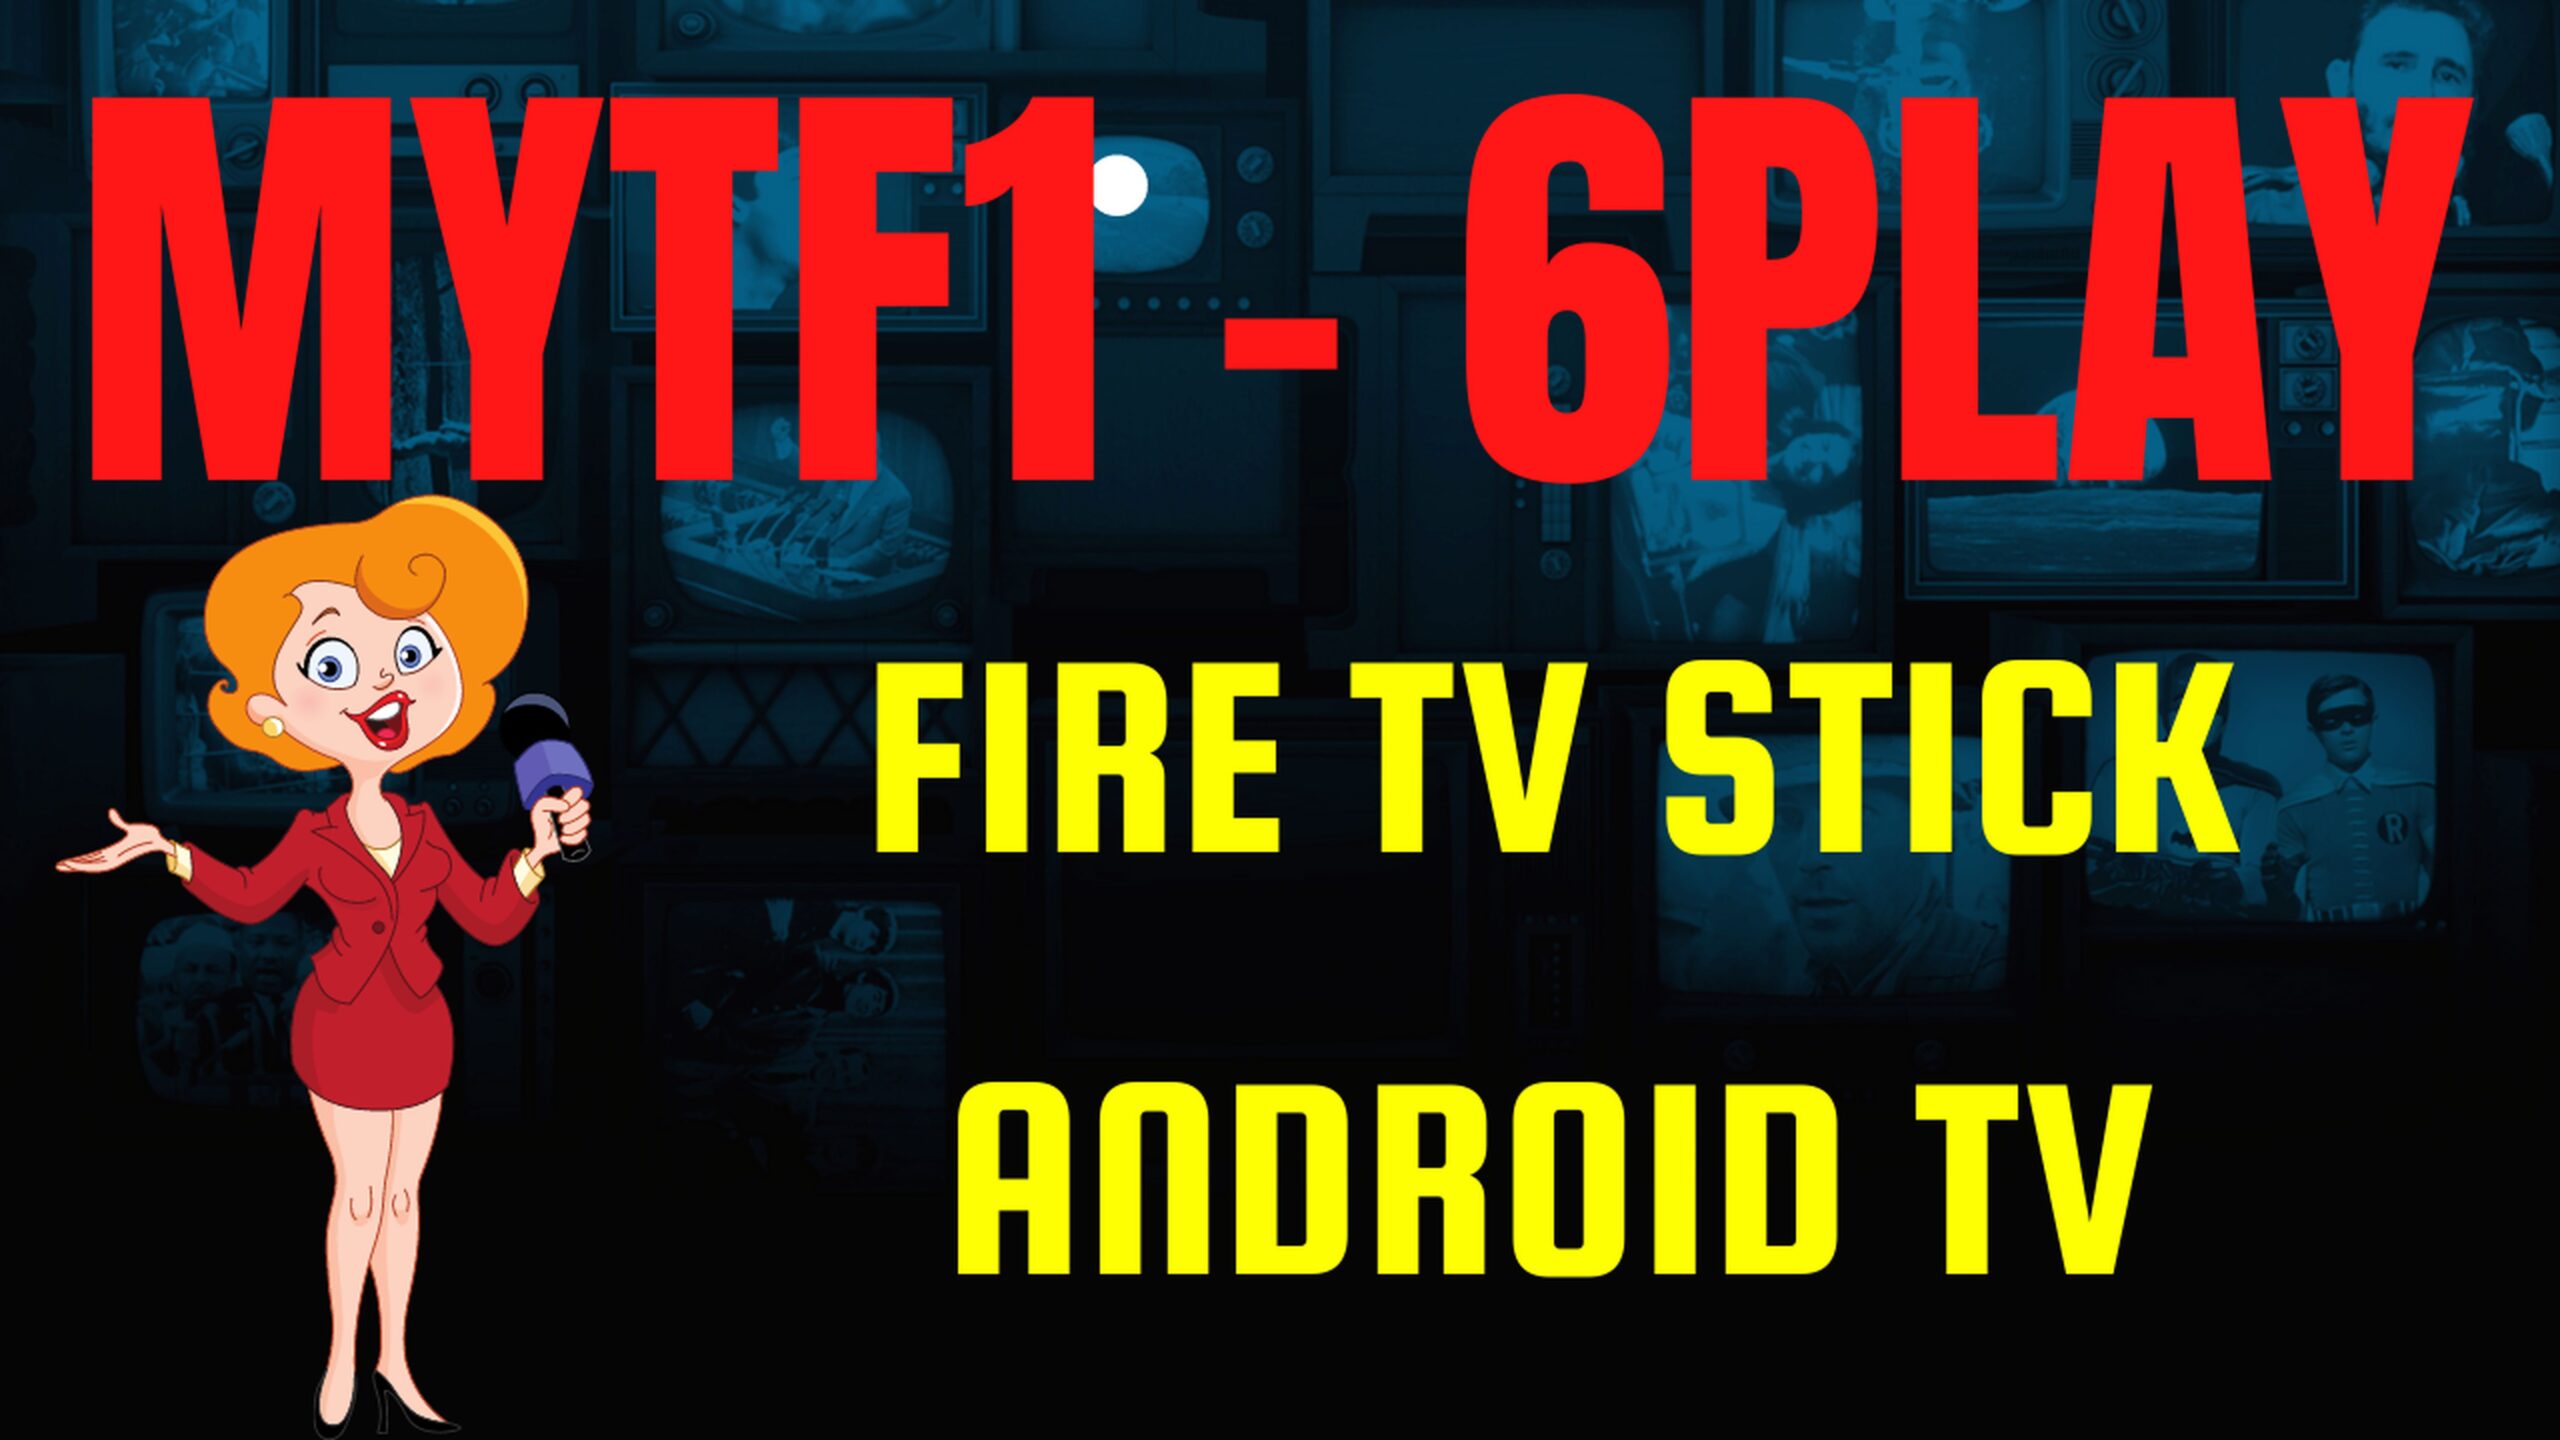 Installer MyTF1 et 6Play (Direct - Replay) sur Fire TV Stick / Android TV 11